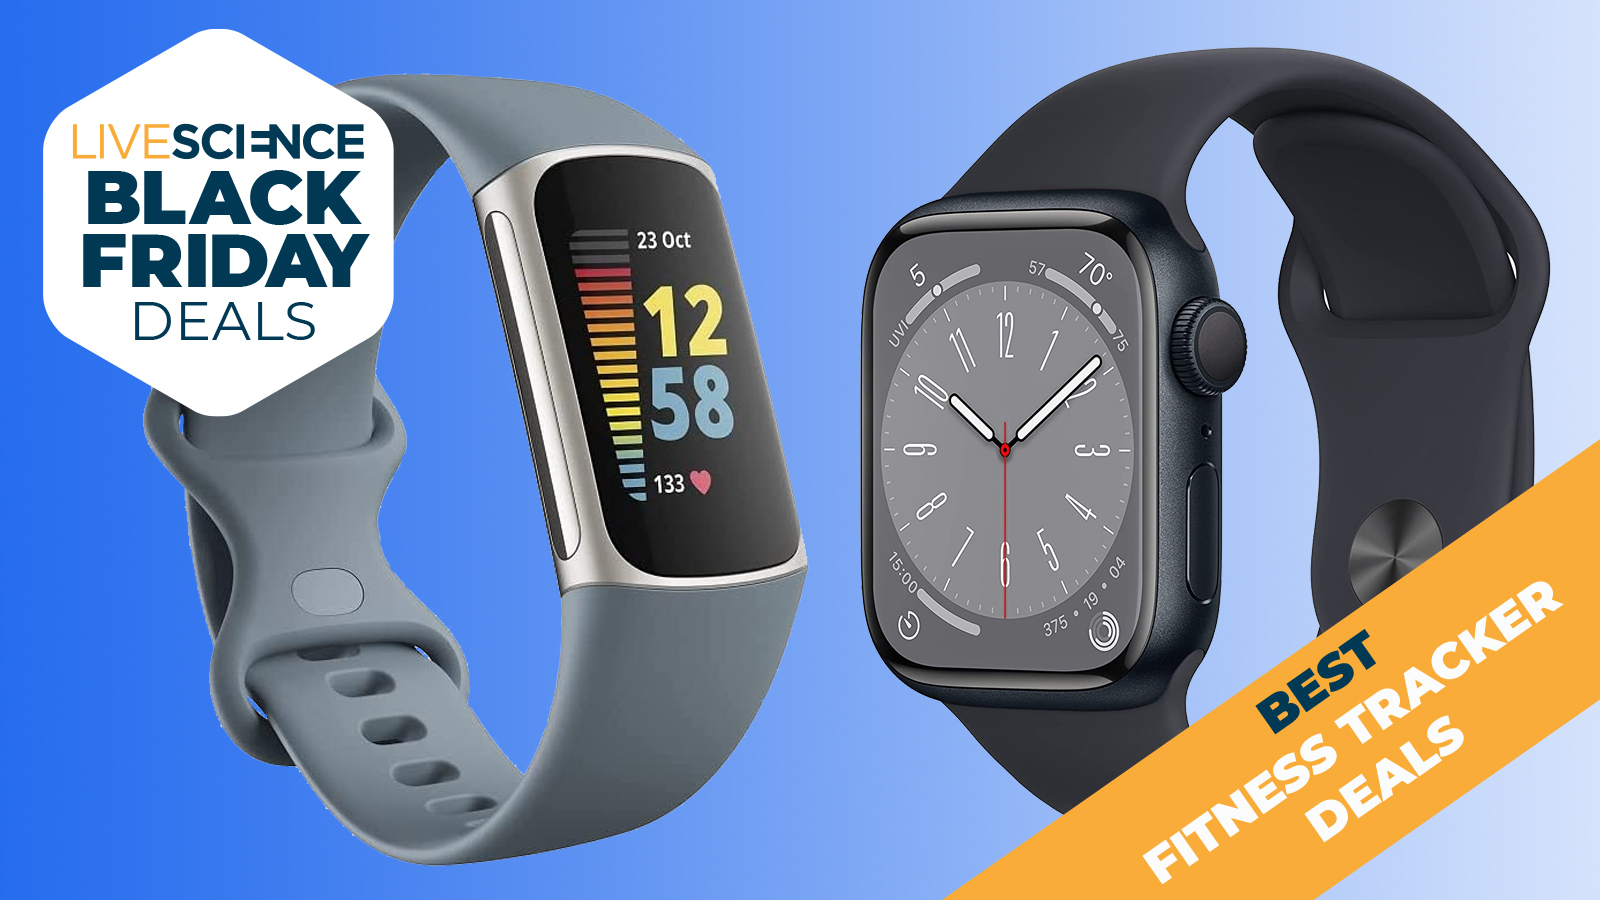 Black Friday fitness tracker deals herald record-low prices from Garmin, Fitbit, Apple and more